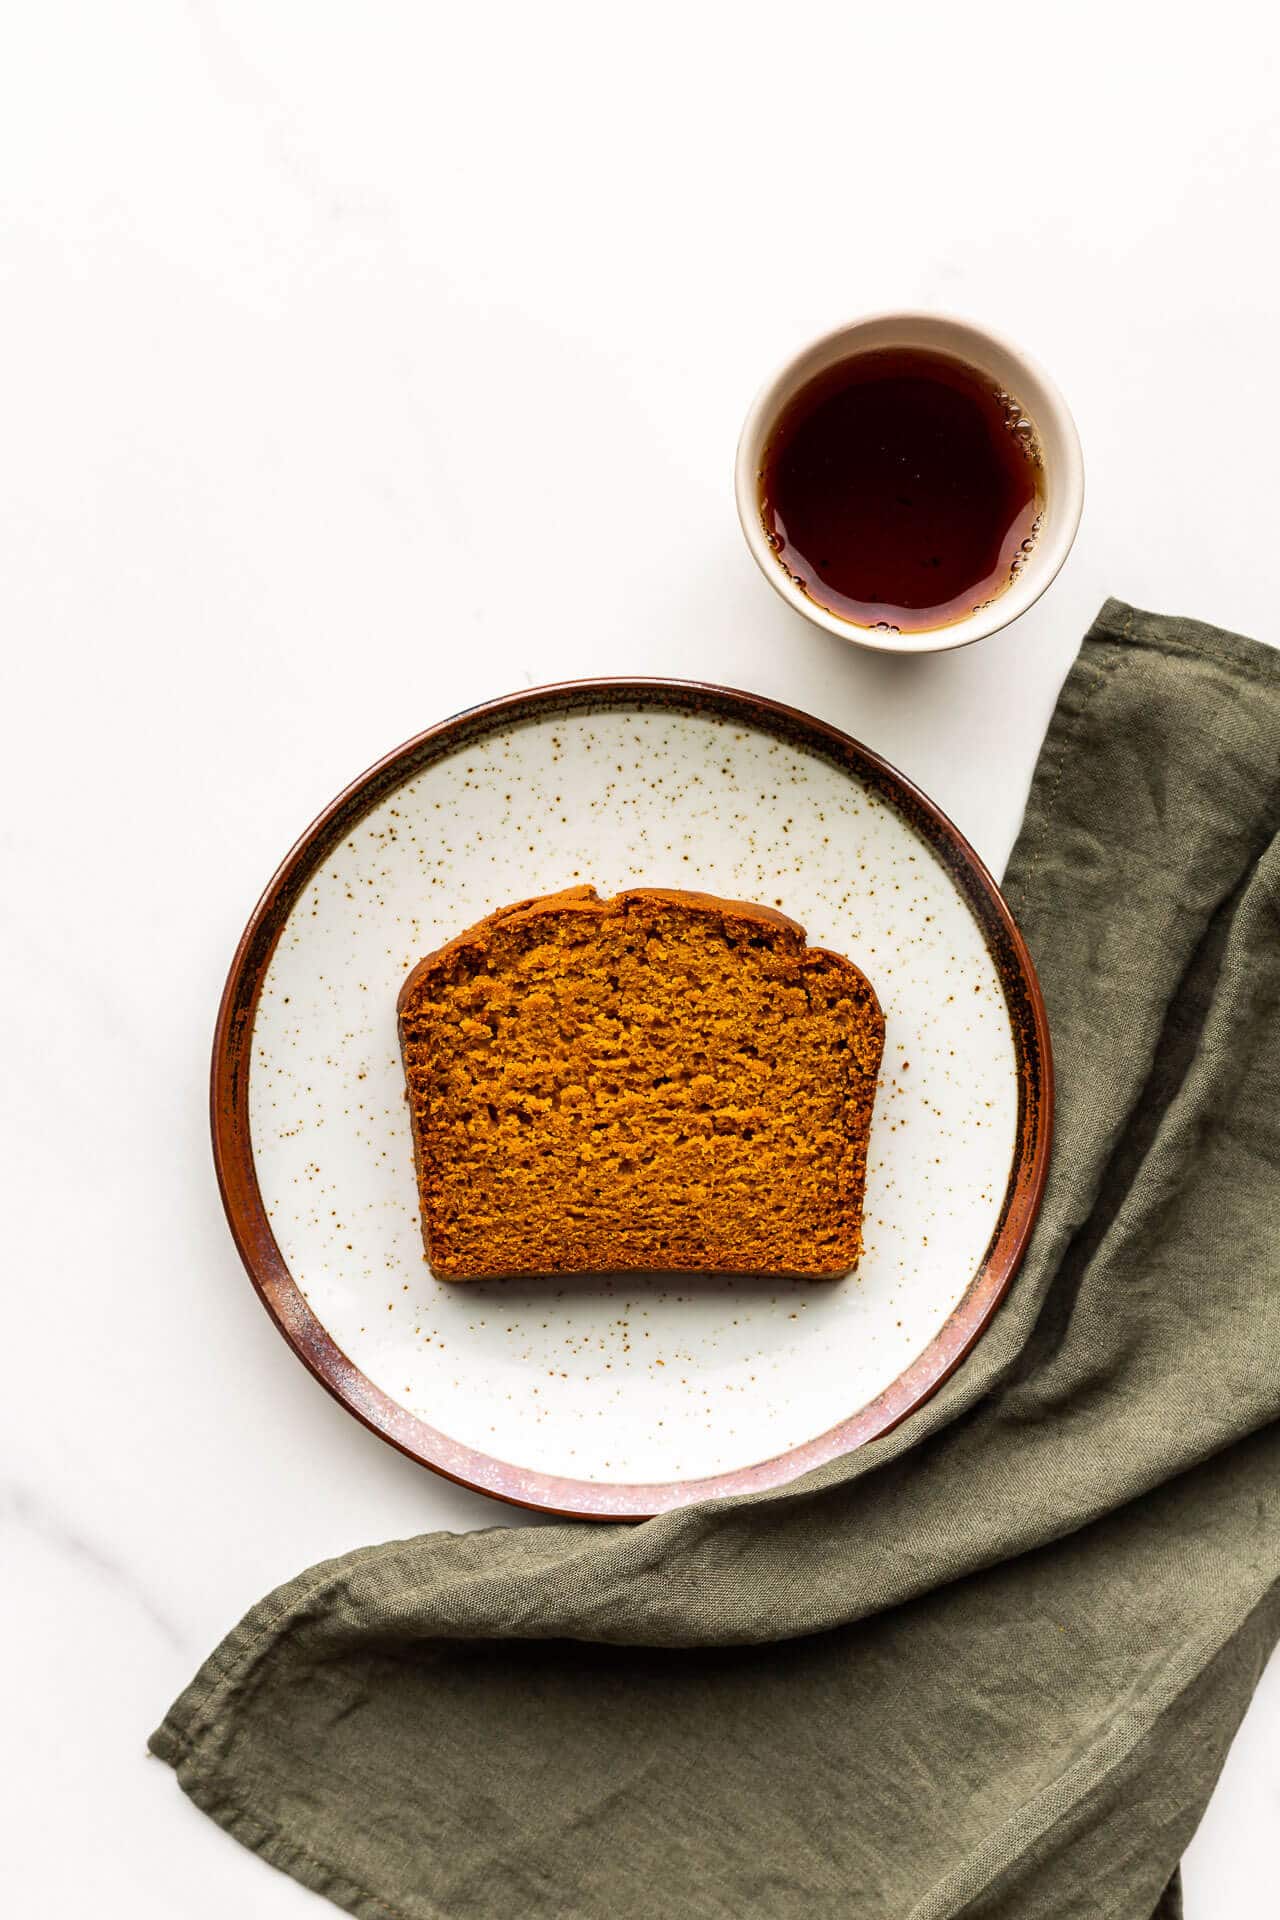 A slice of pumpkin spice loaf cake with a cup of tea and a green linen.